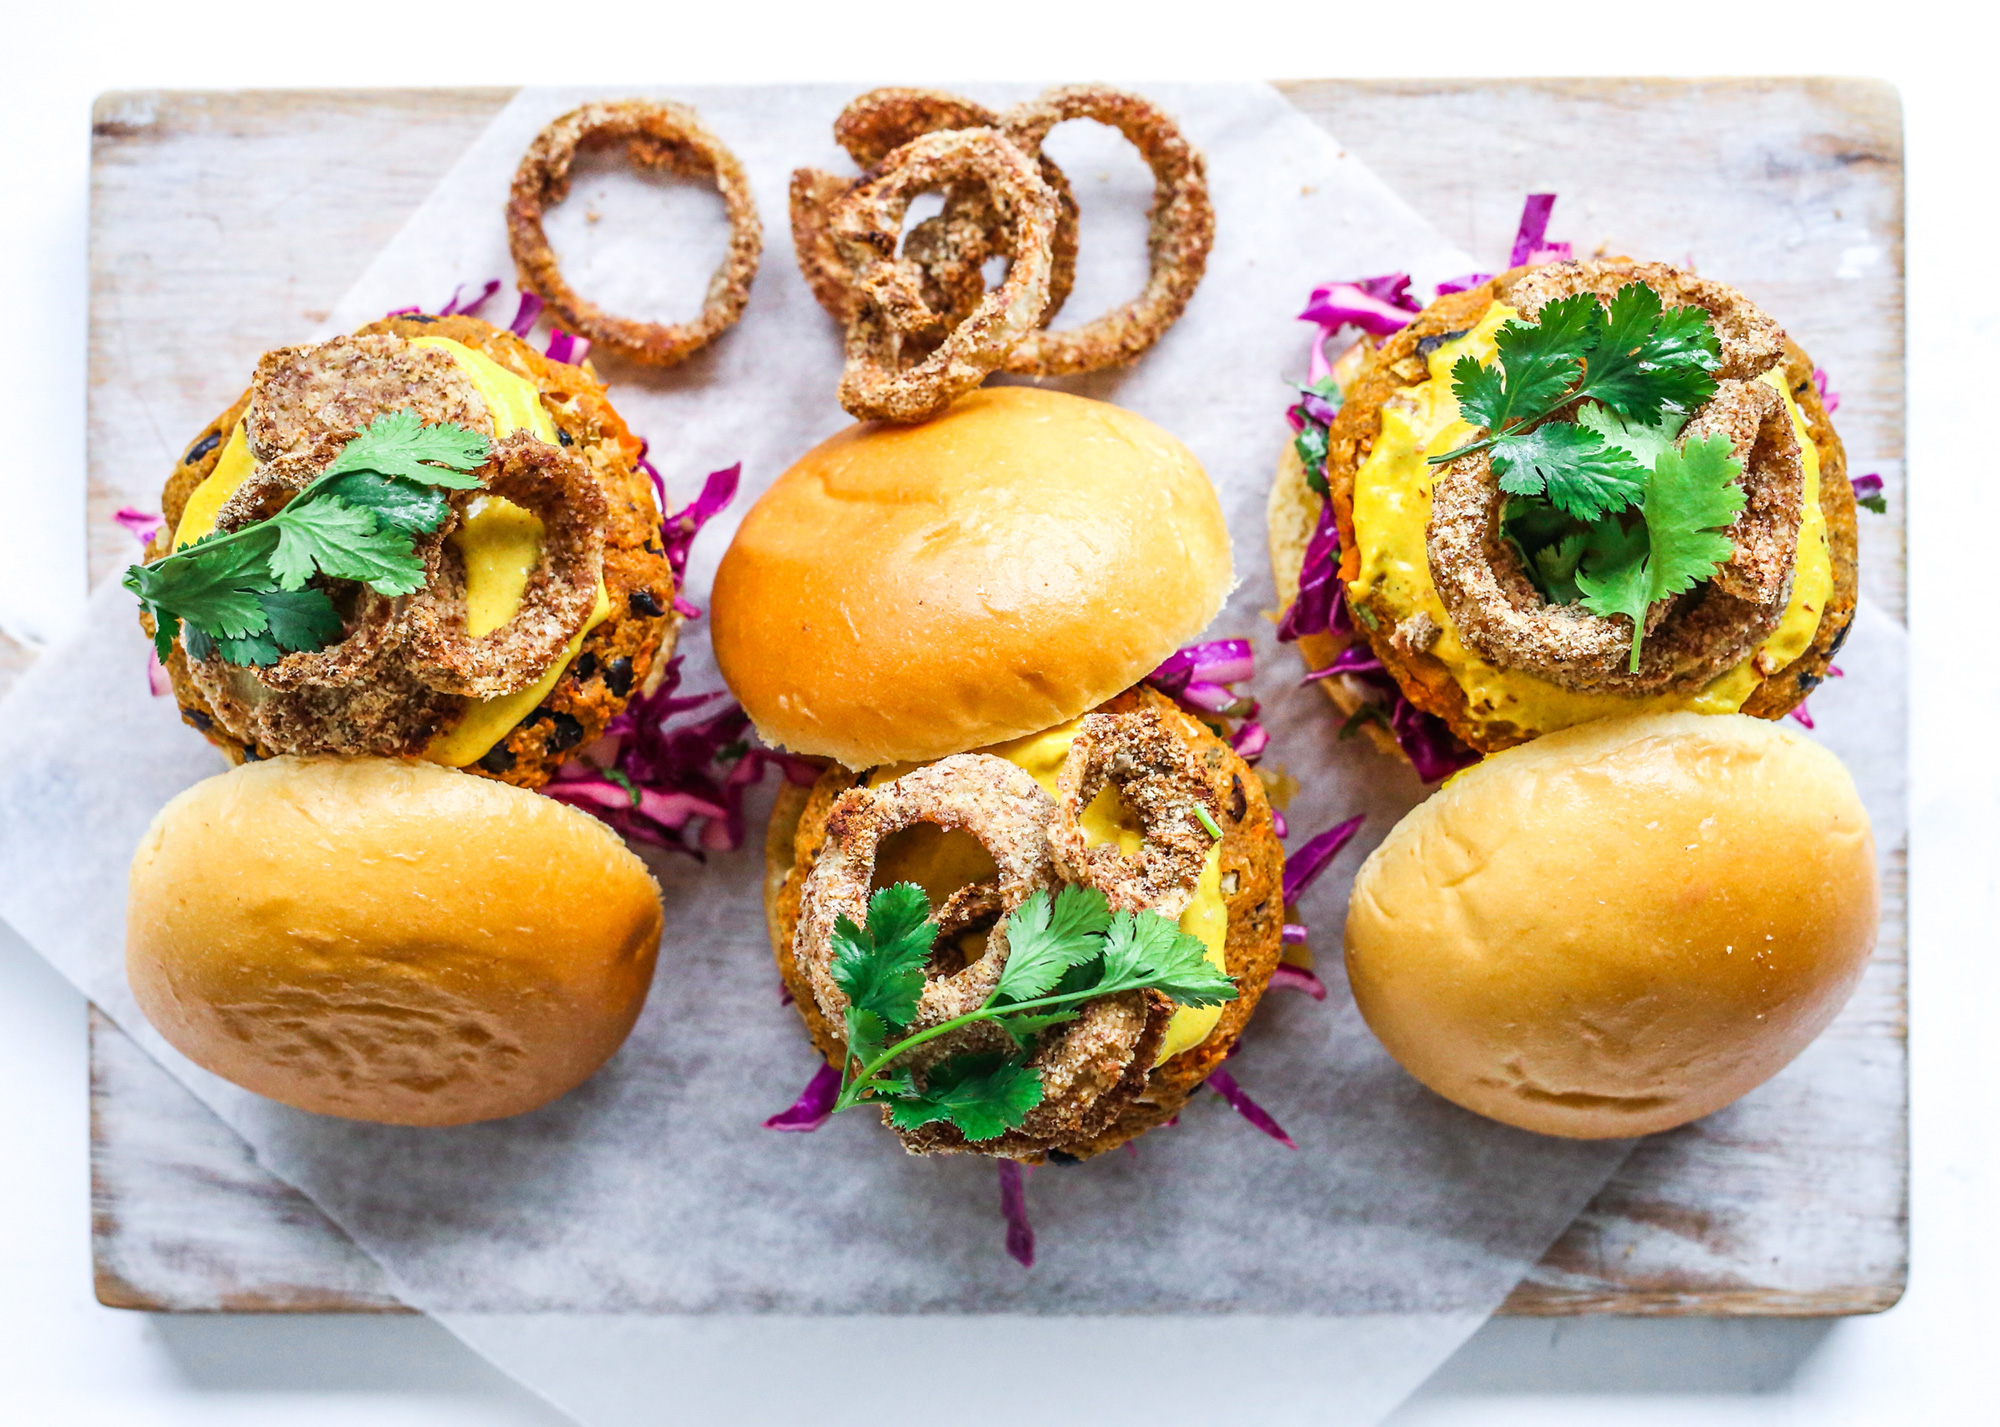 Sweet Potato Burgers with Cumin Spiced Onion Rings